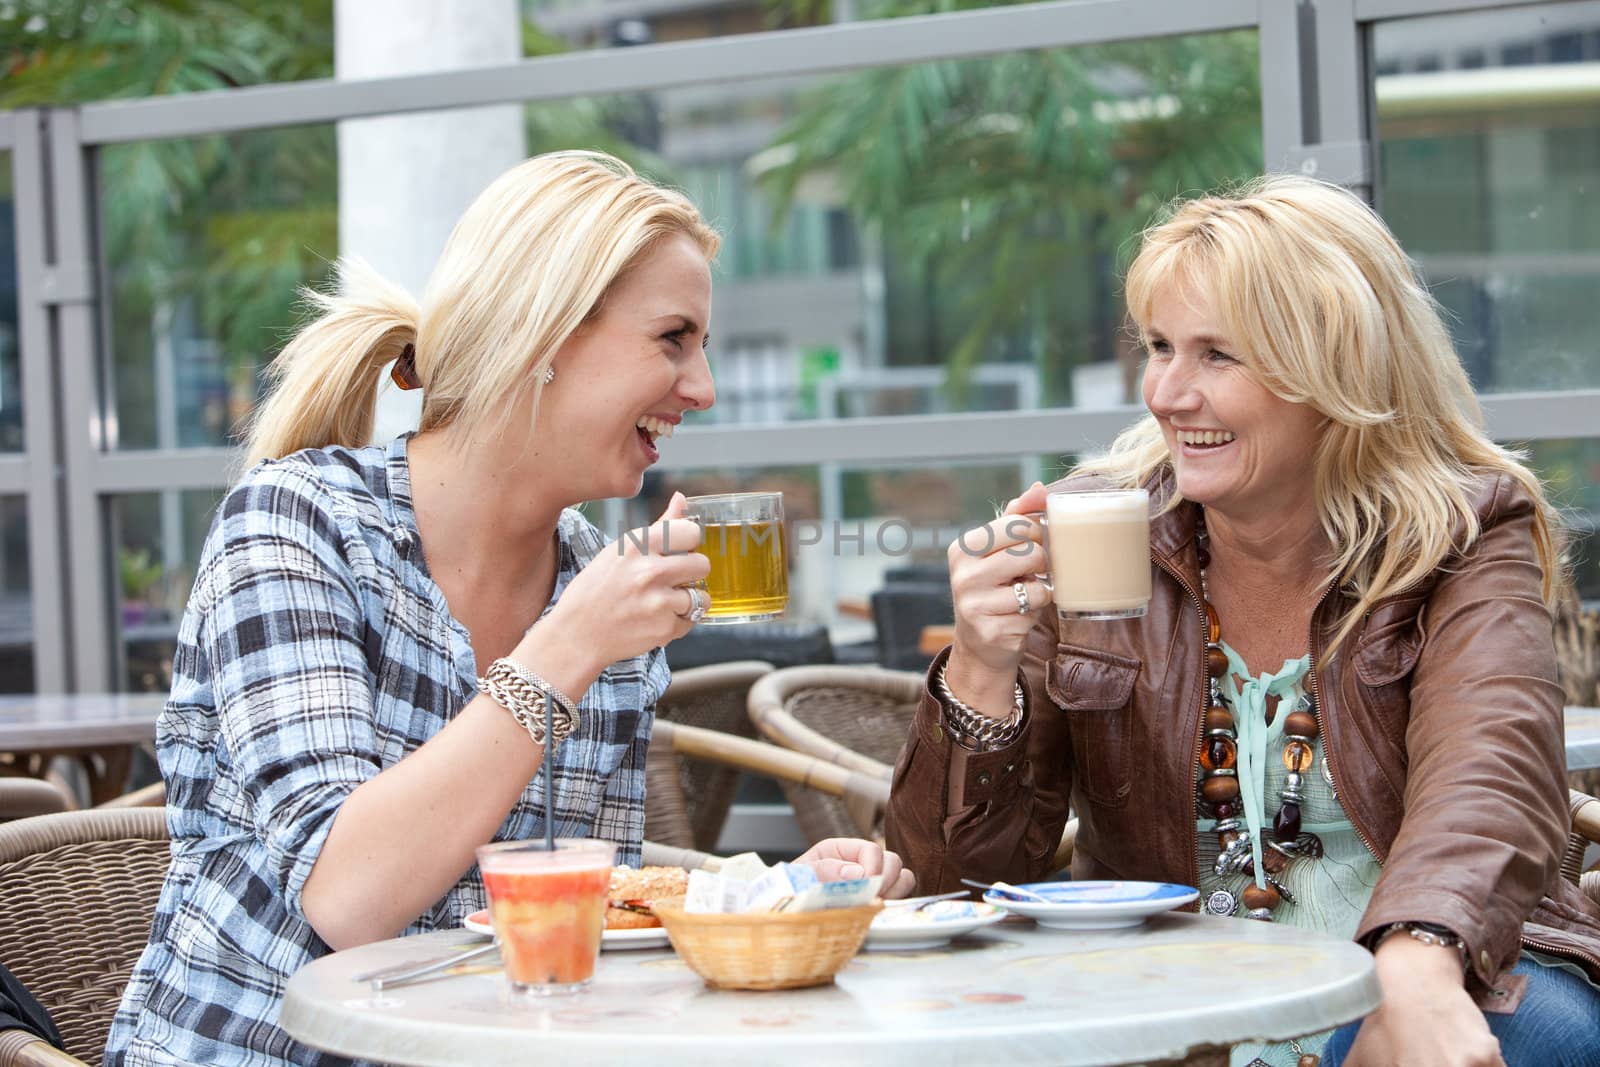 Mother and daughter having tea and coffee laughing together